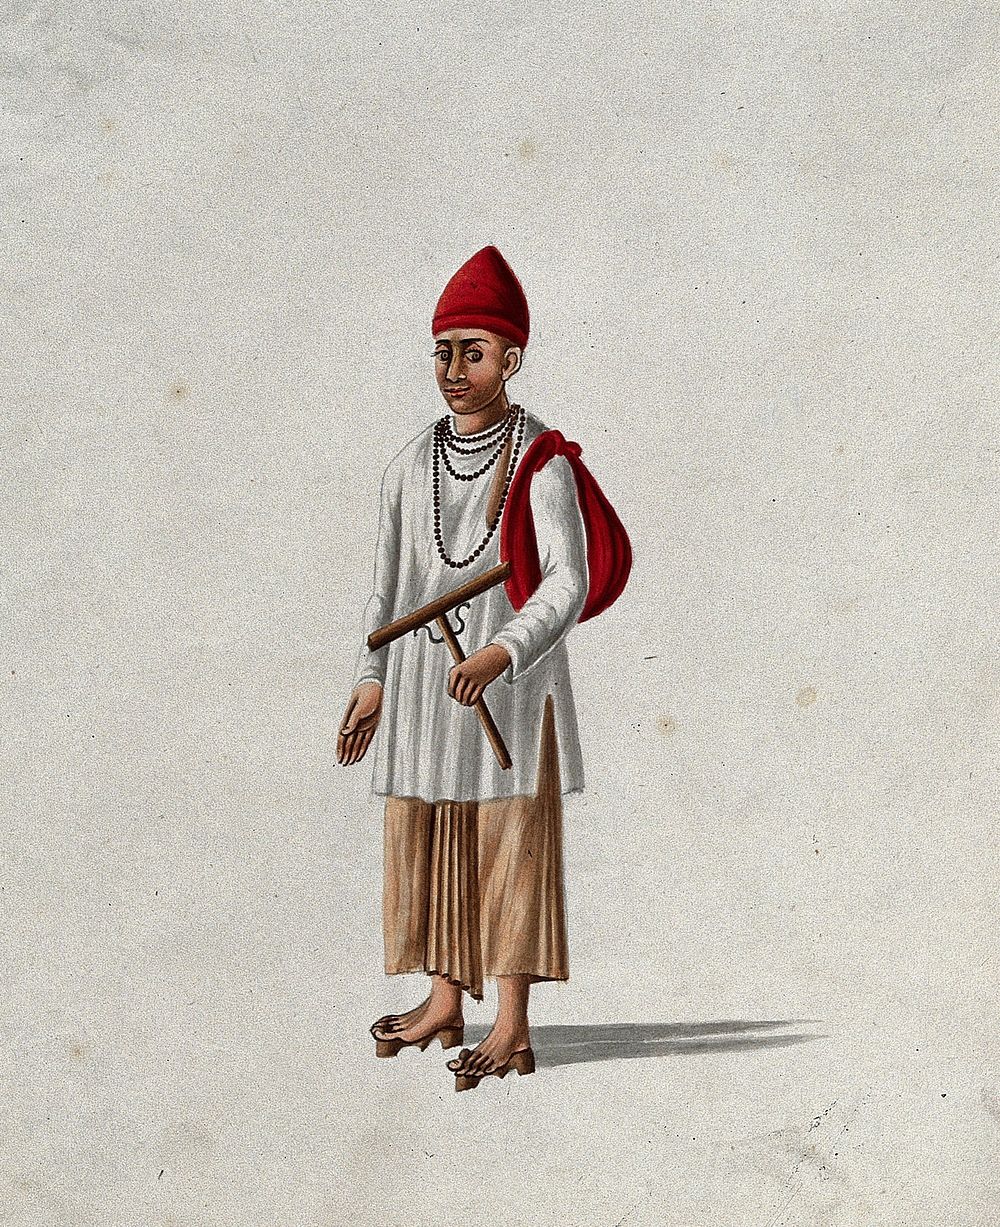 A religious man wearing a red cap and prayer beads around his neck. Gouache painting by an Indian artist.